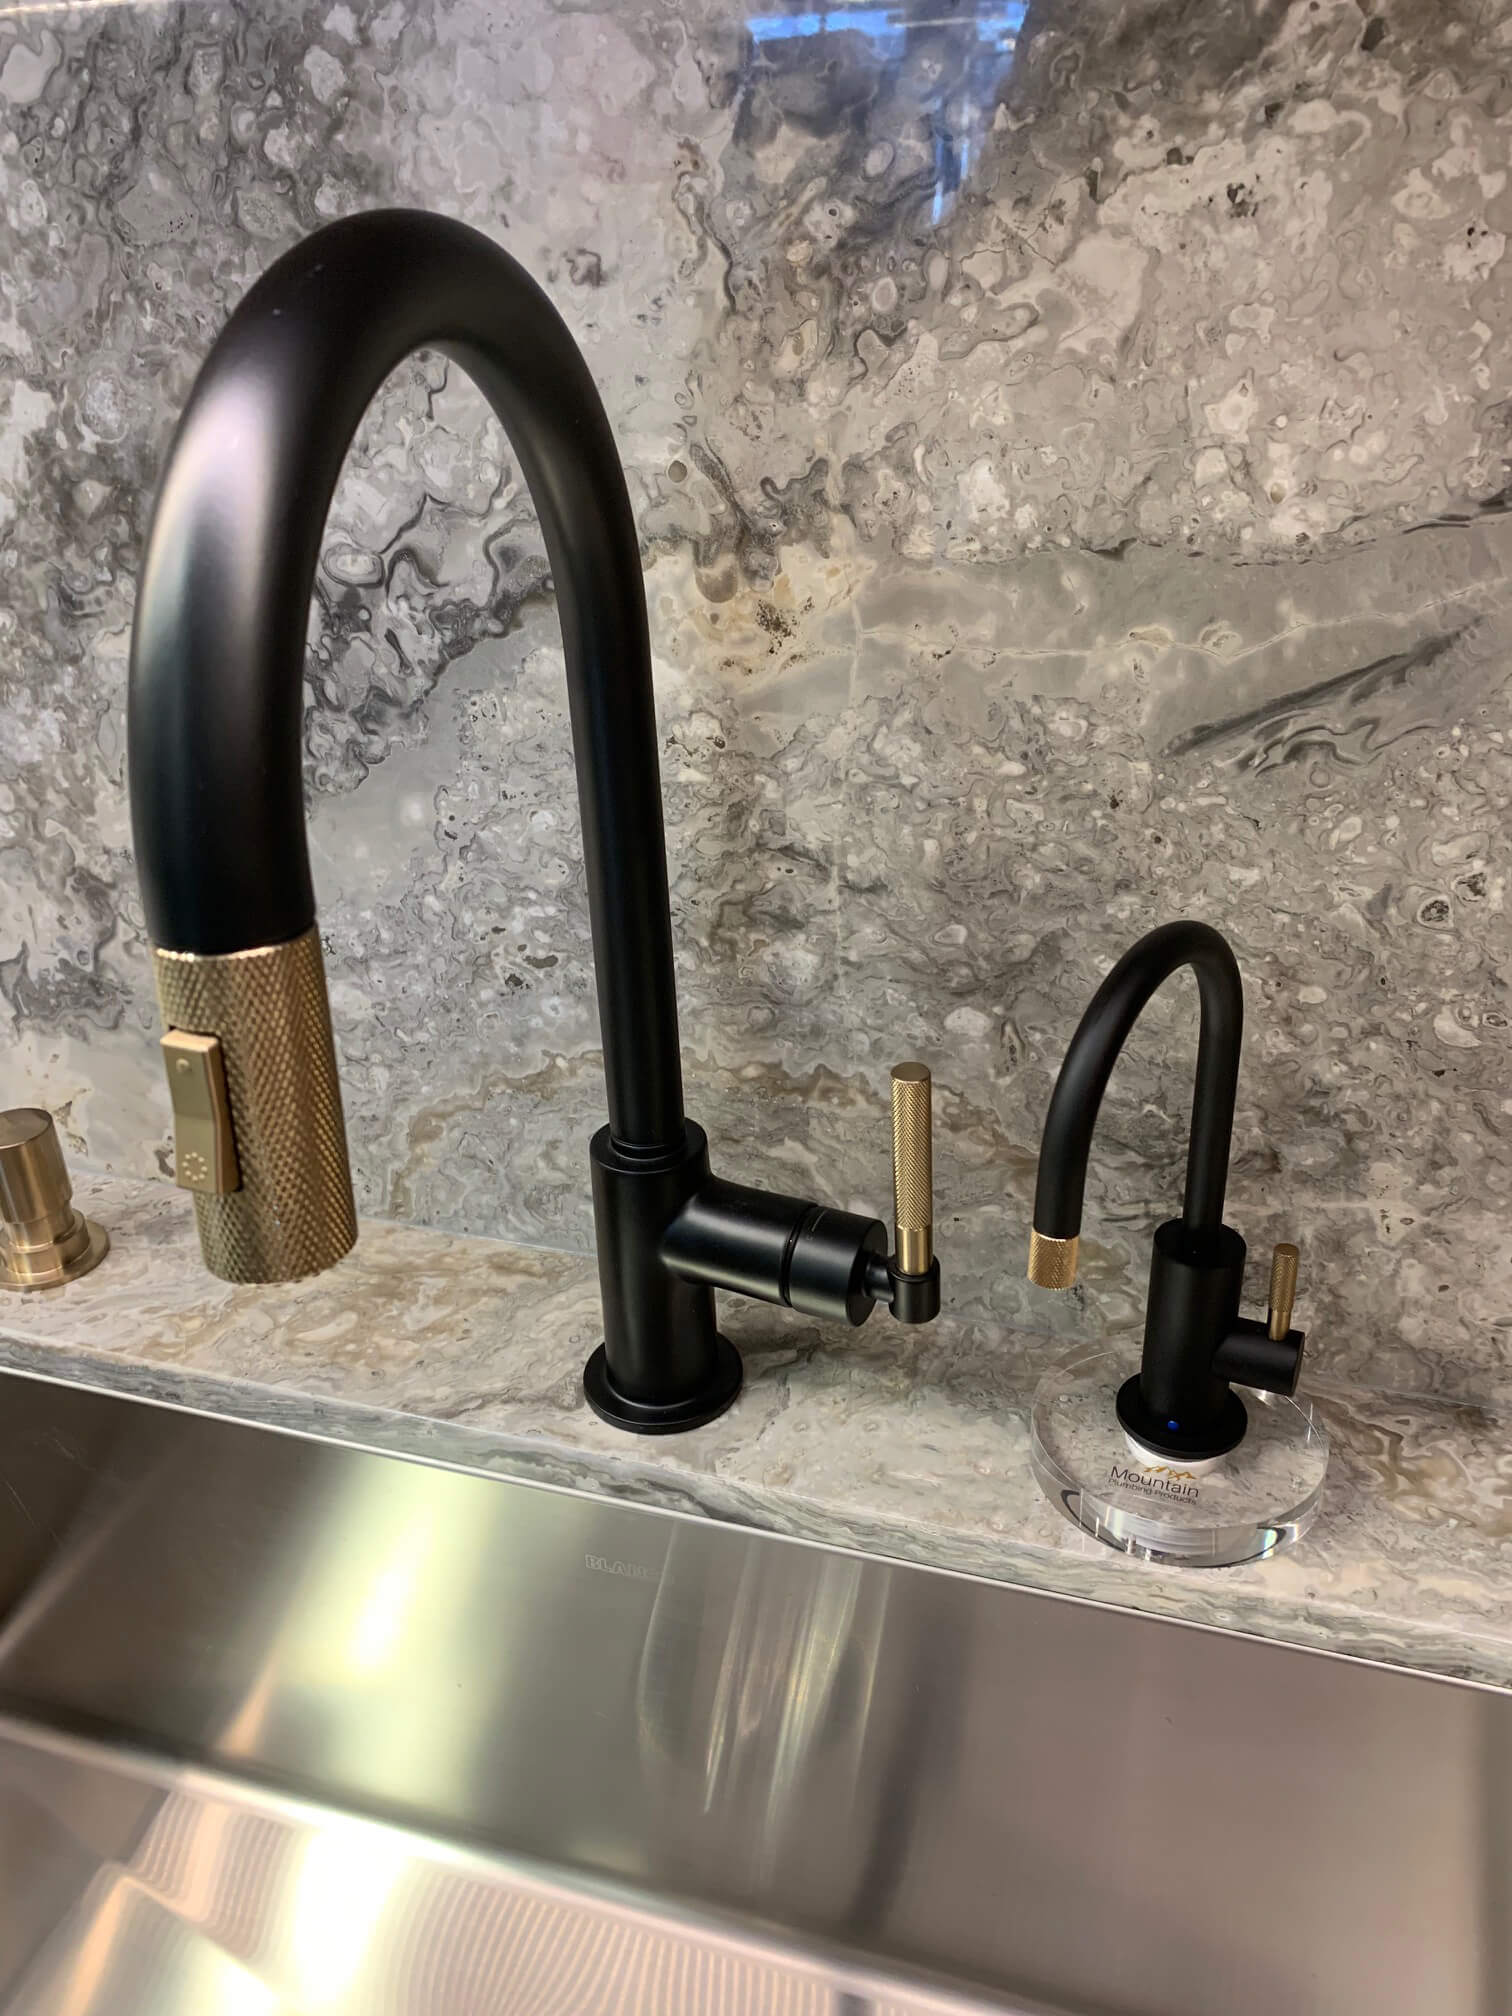 Pairing The Mt1843 Duet Knurled Faucet With Brizo S Litze Kitchen